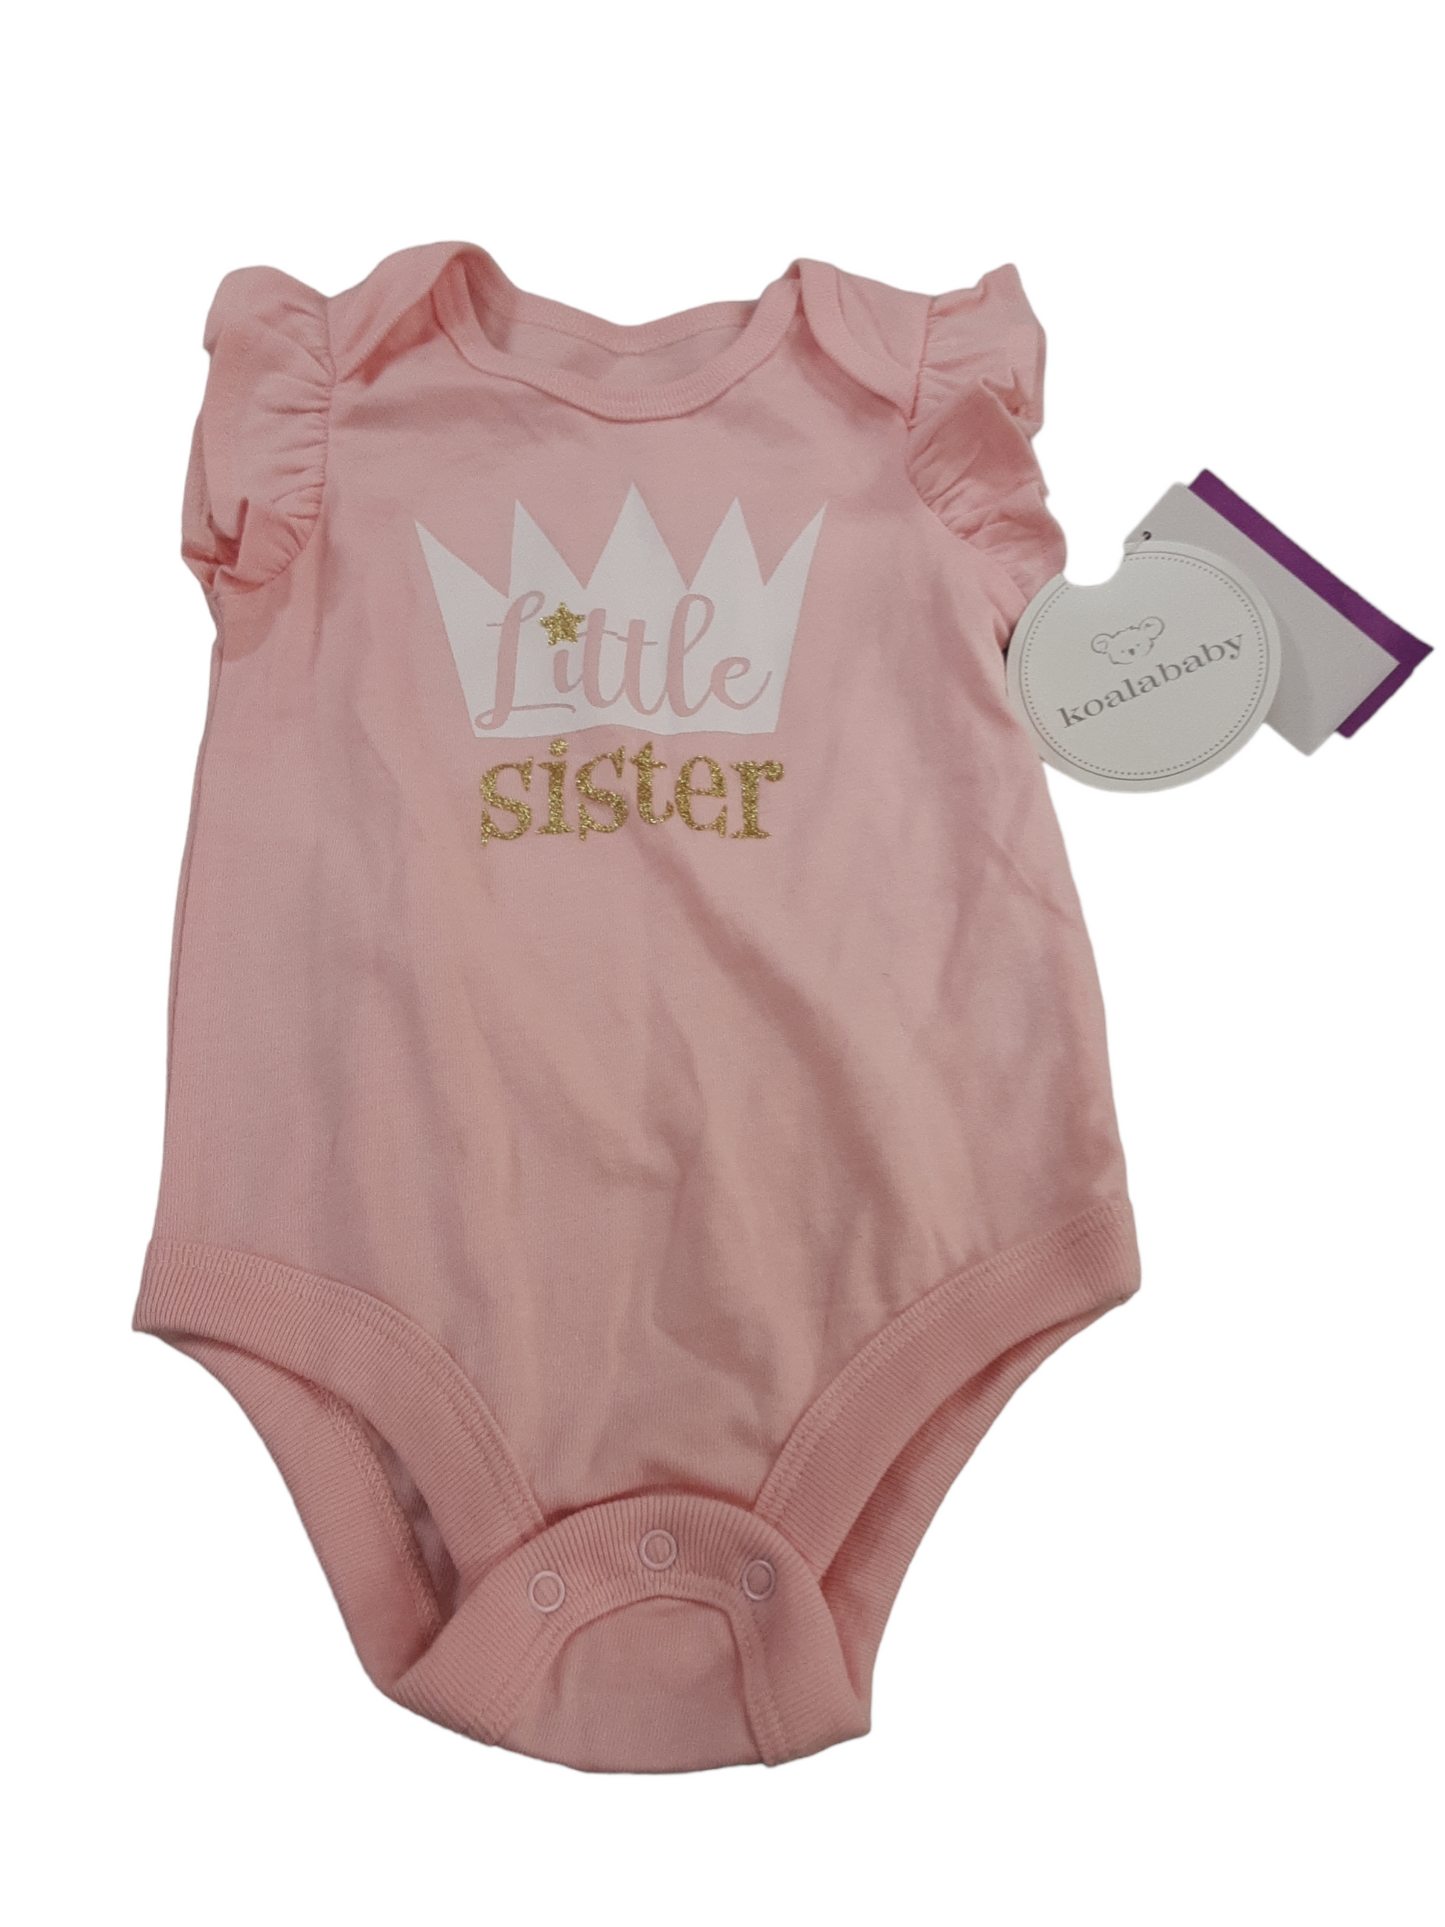 New Little Sister onsie size 12-18months